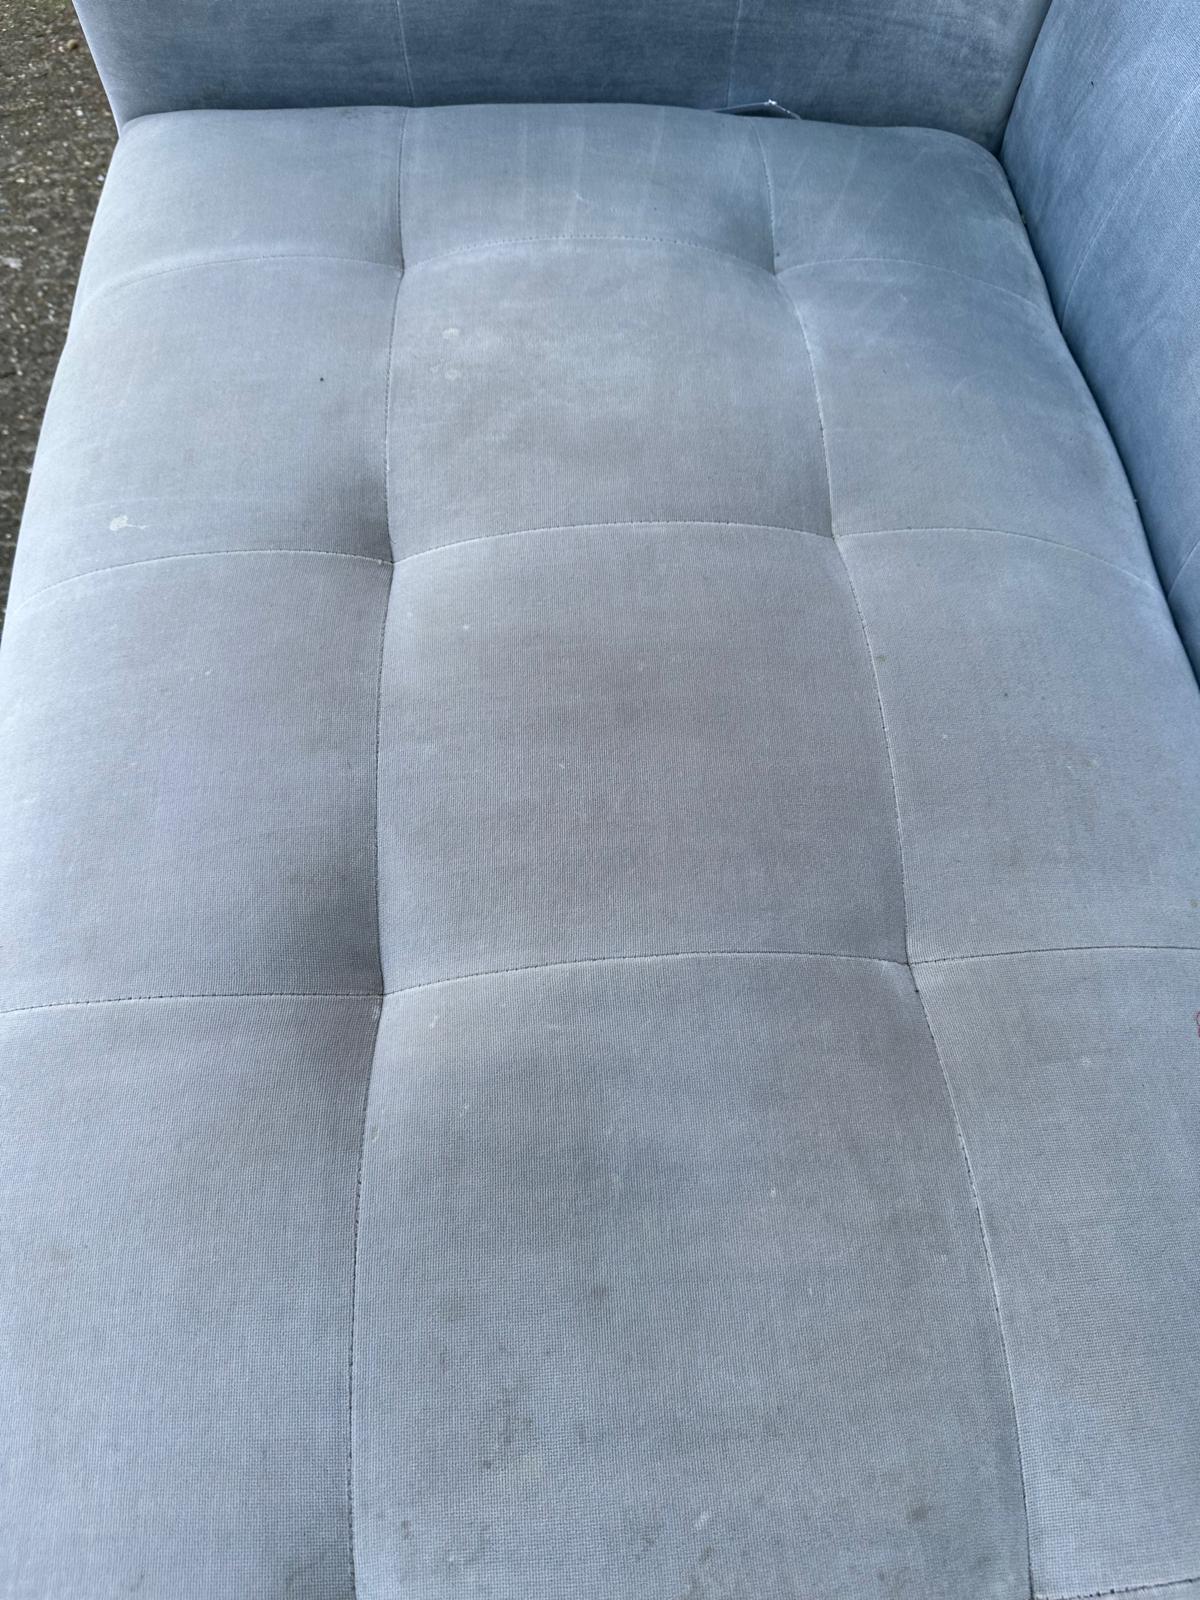 A contemporary four seater upholstered sofa in grey on brass ball feet 230cm x 86cm - Image 3 of 4